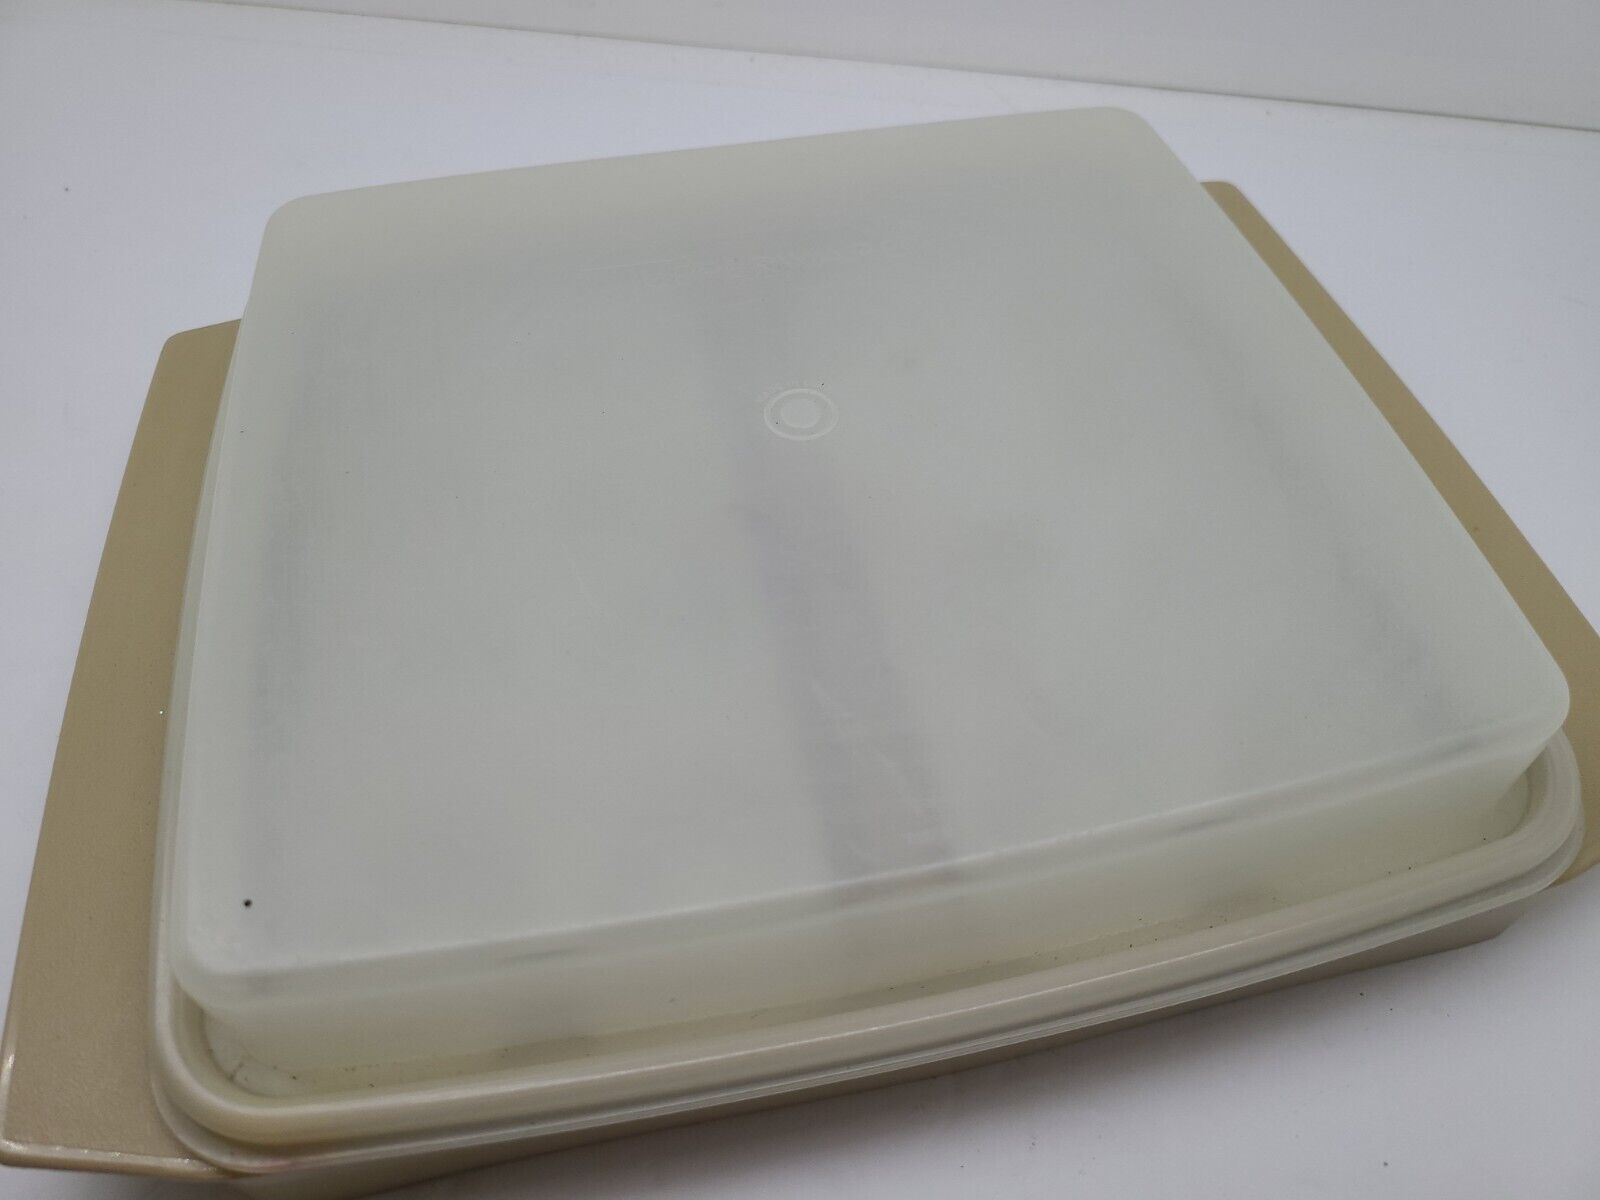 NICE Vintage Tupperware 723-2 Beige Brown Deviled Egg Tray Container Carrier